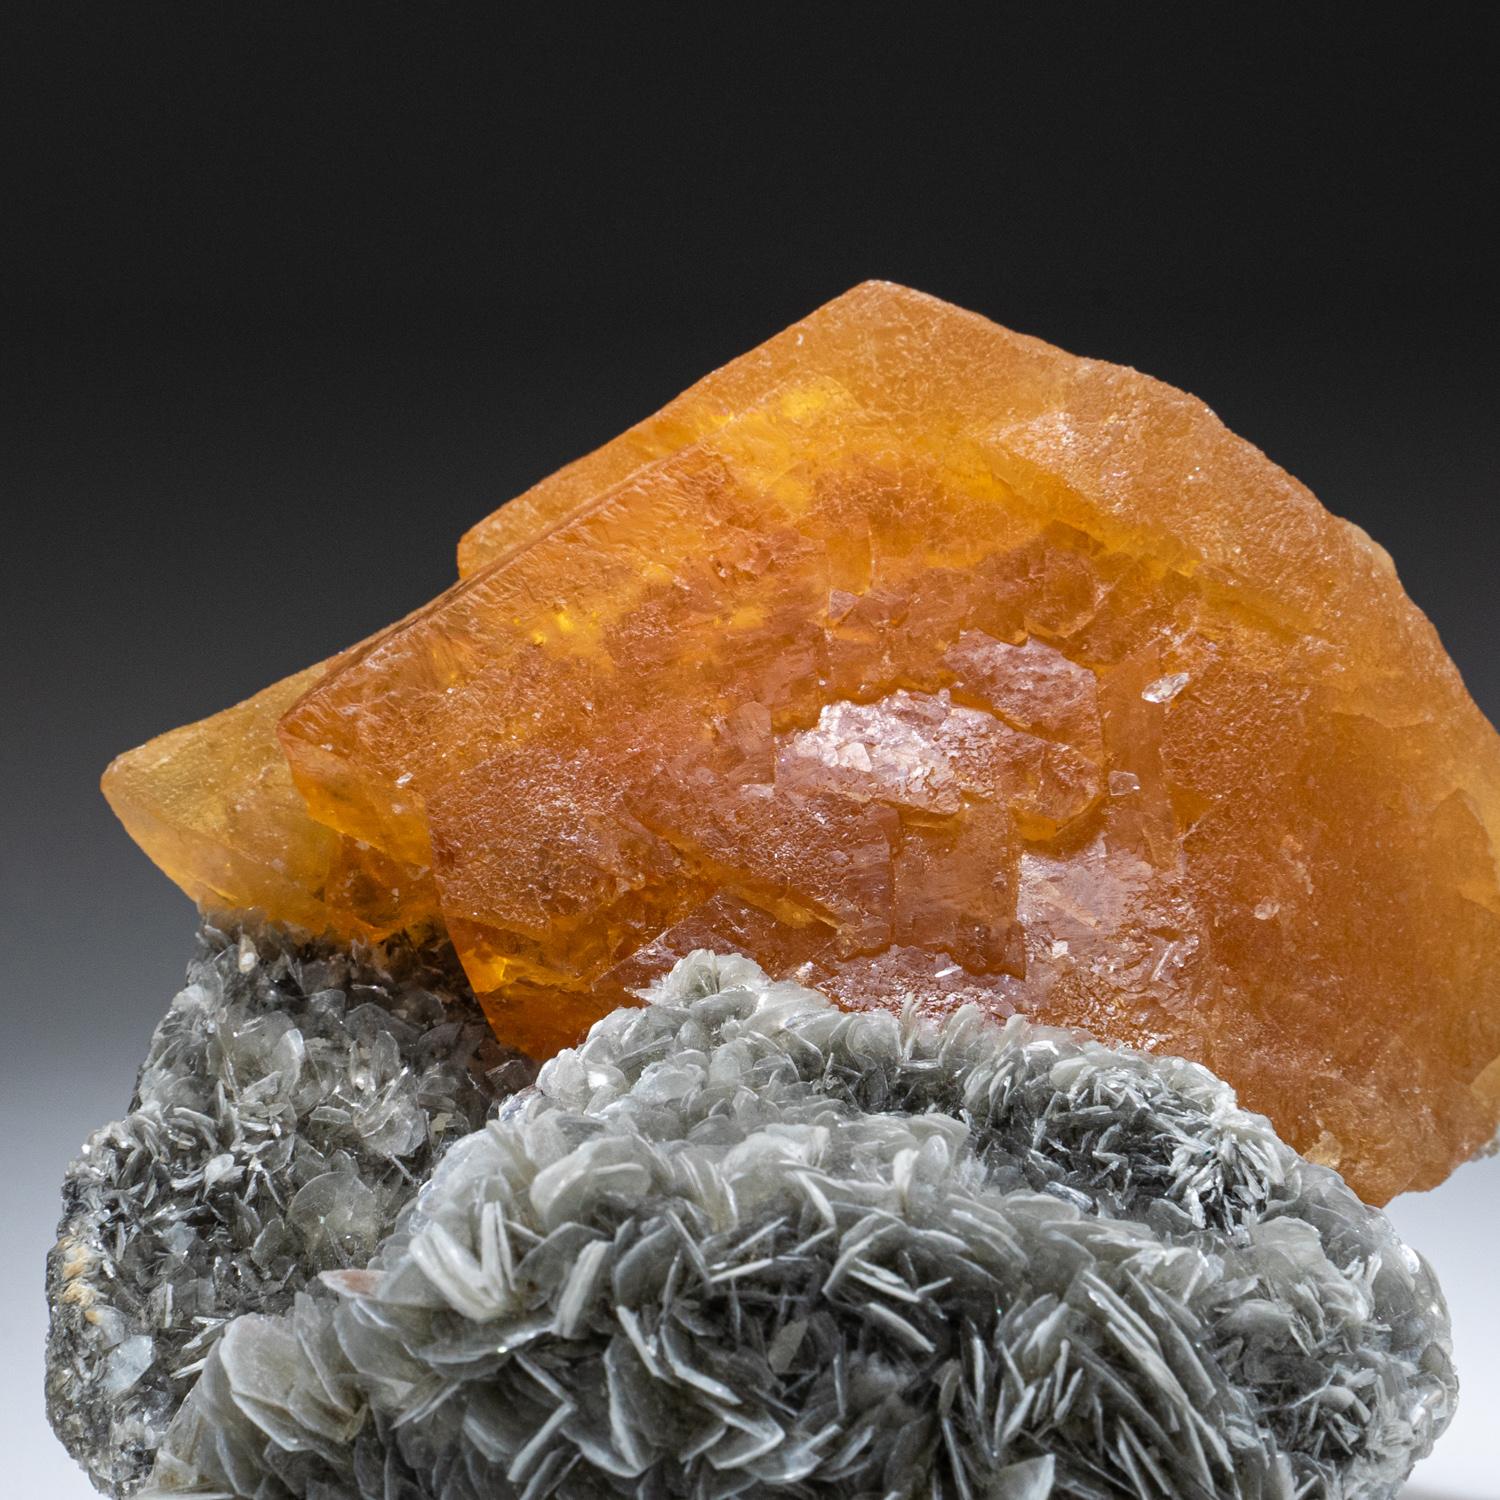 From Mt. Xueboading, Pingwu Co., Mianyang Pref., Sichuan Prov., ChinaA single crystal of bright orange octahedrals of scheelite on matrix of silvery muscovite crystals. The scheelite are fully terminate This rare occurrence of Scheelite on Muscovite